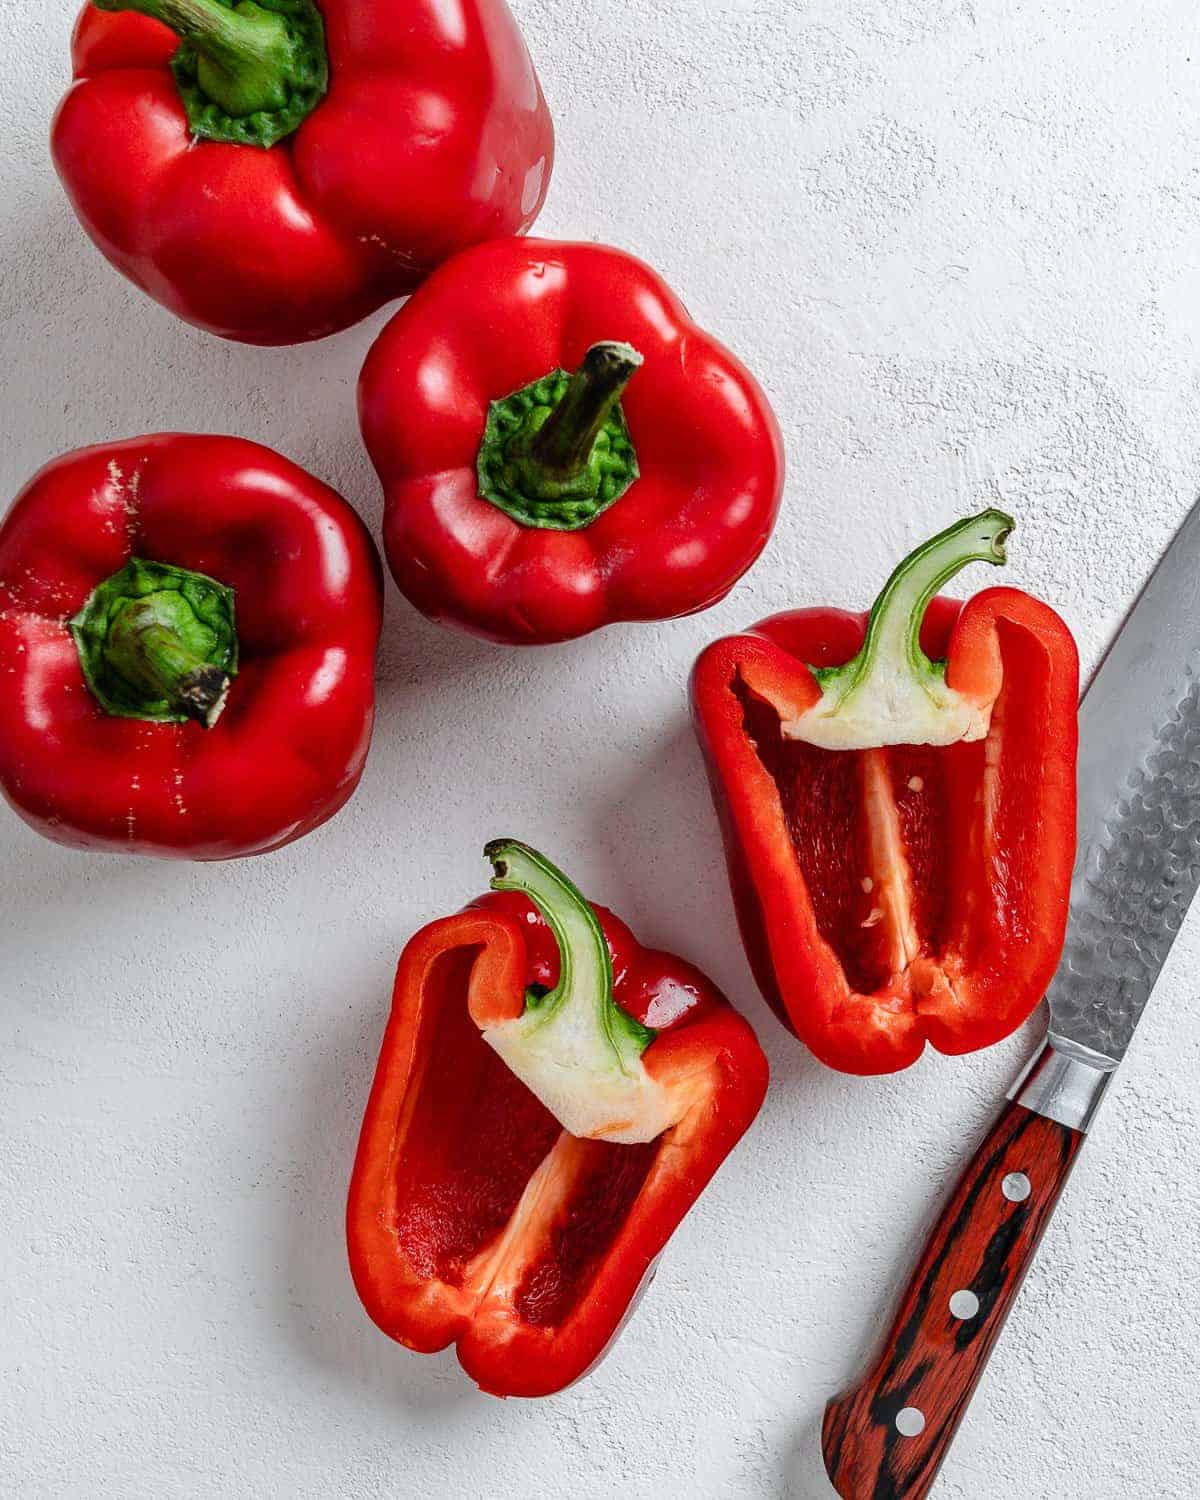 three red bell peppers and one red bell pepper halved on a white surface